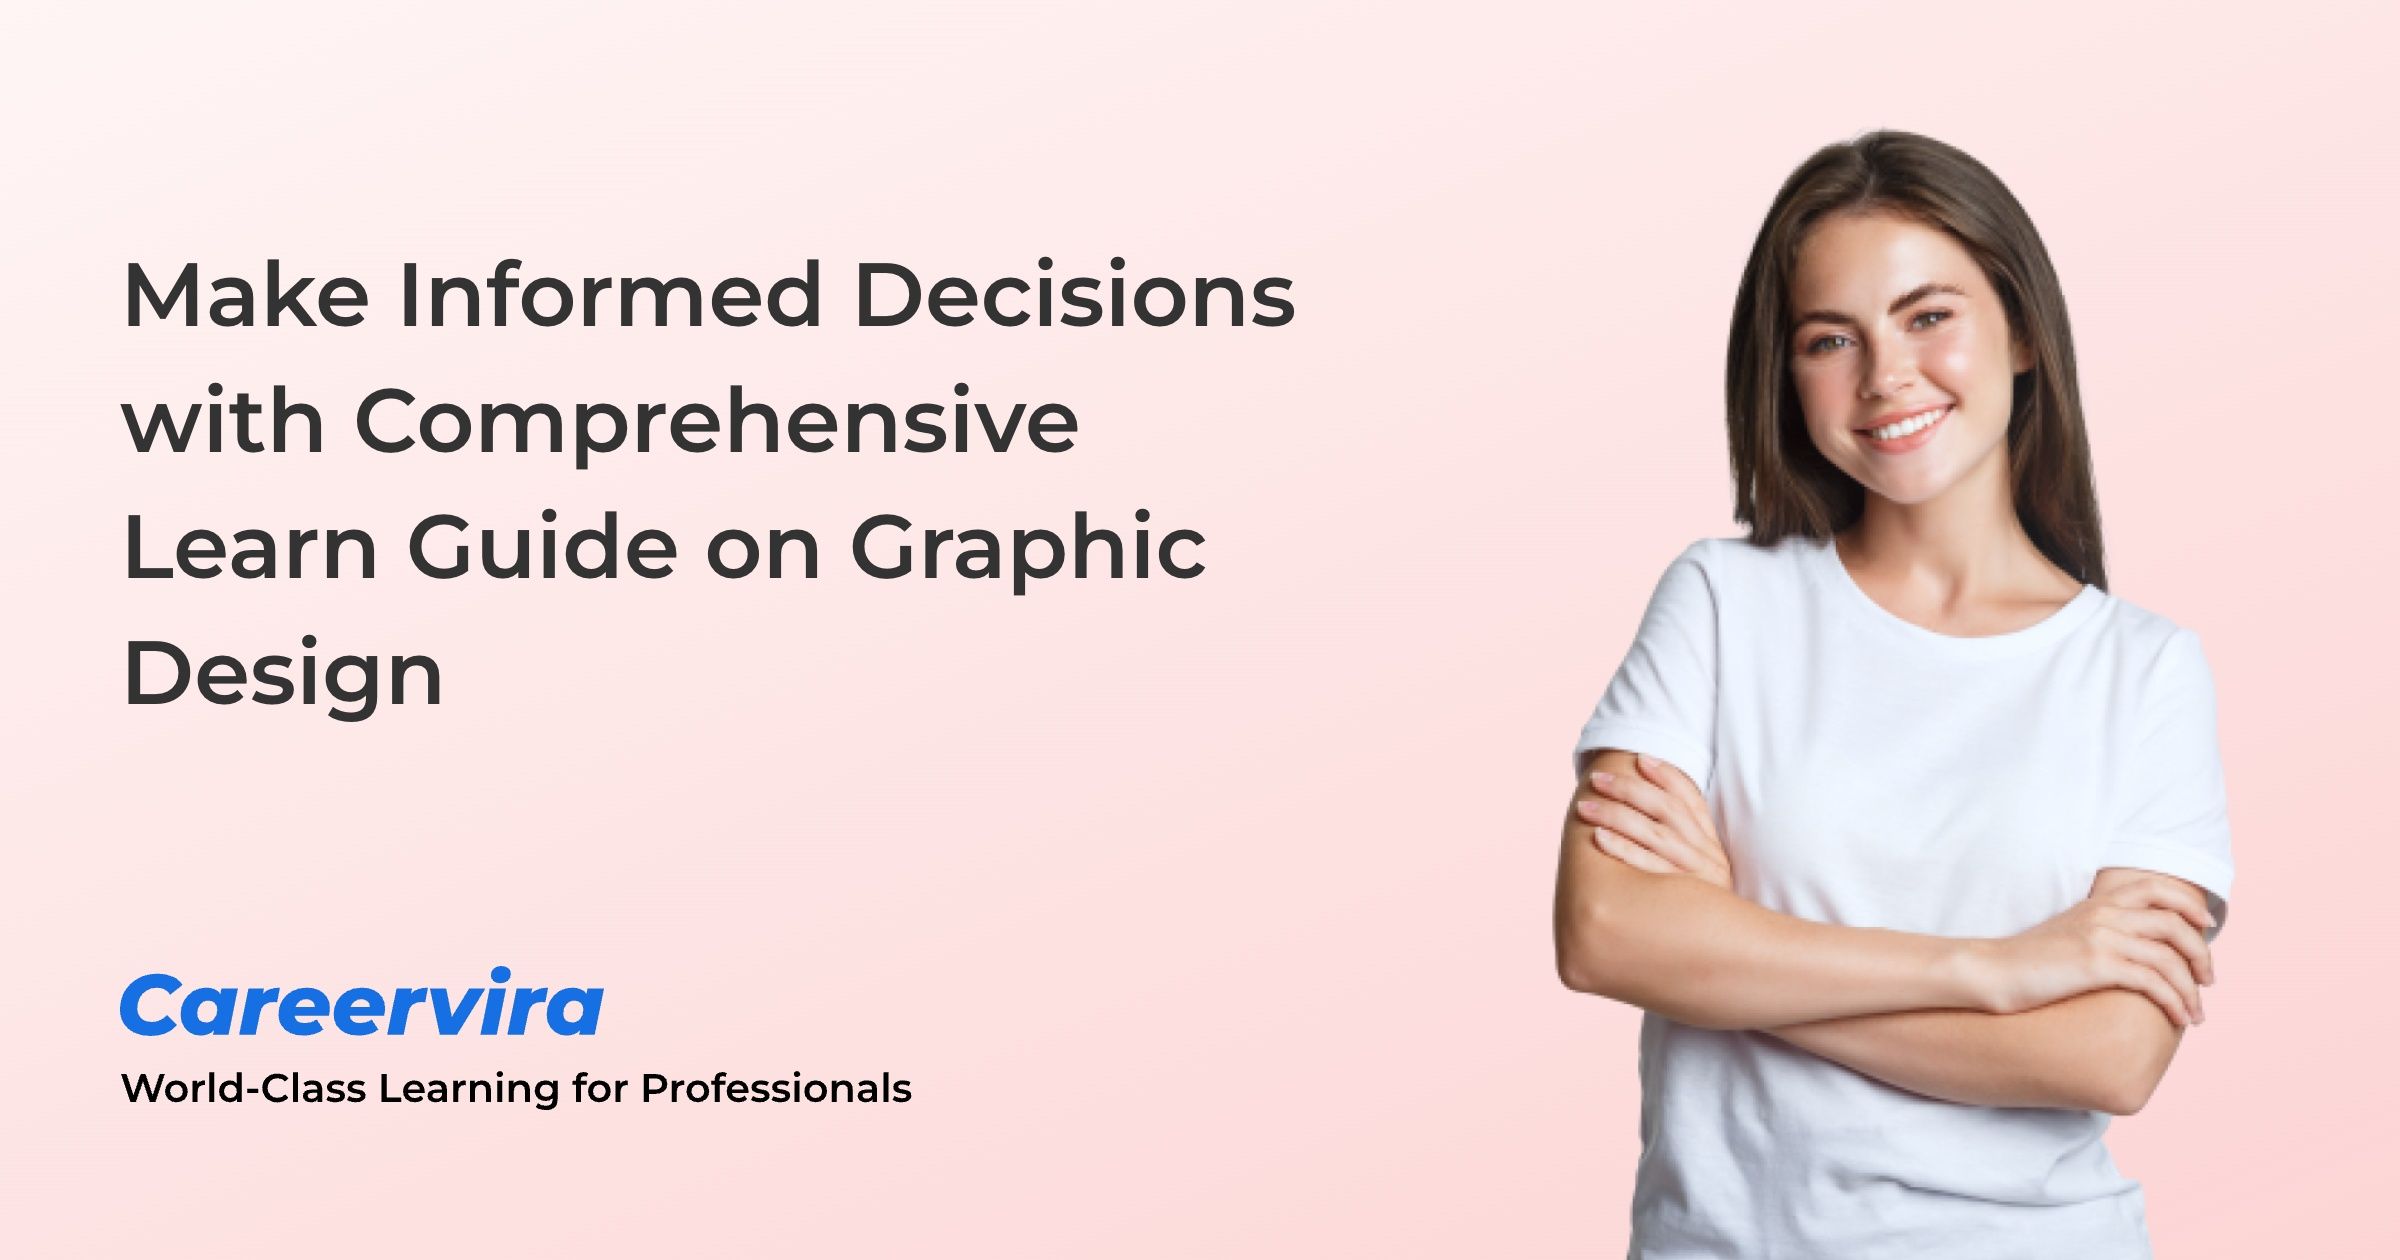 Figure: Make Informed Decisions with Comprehensive Learn Guide on Graphic Design